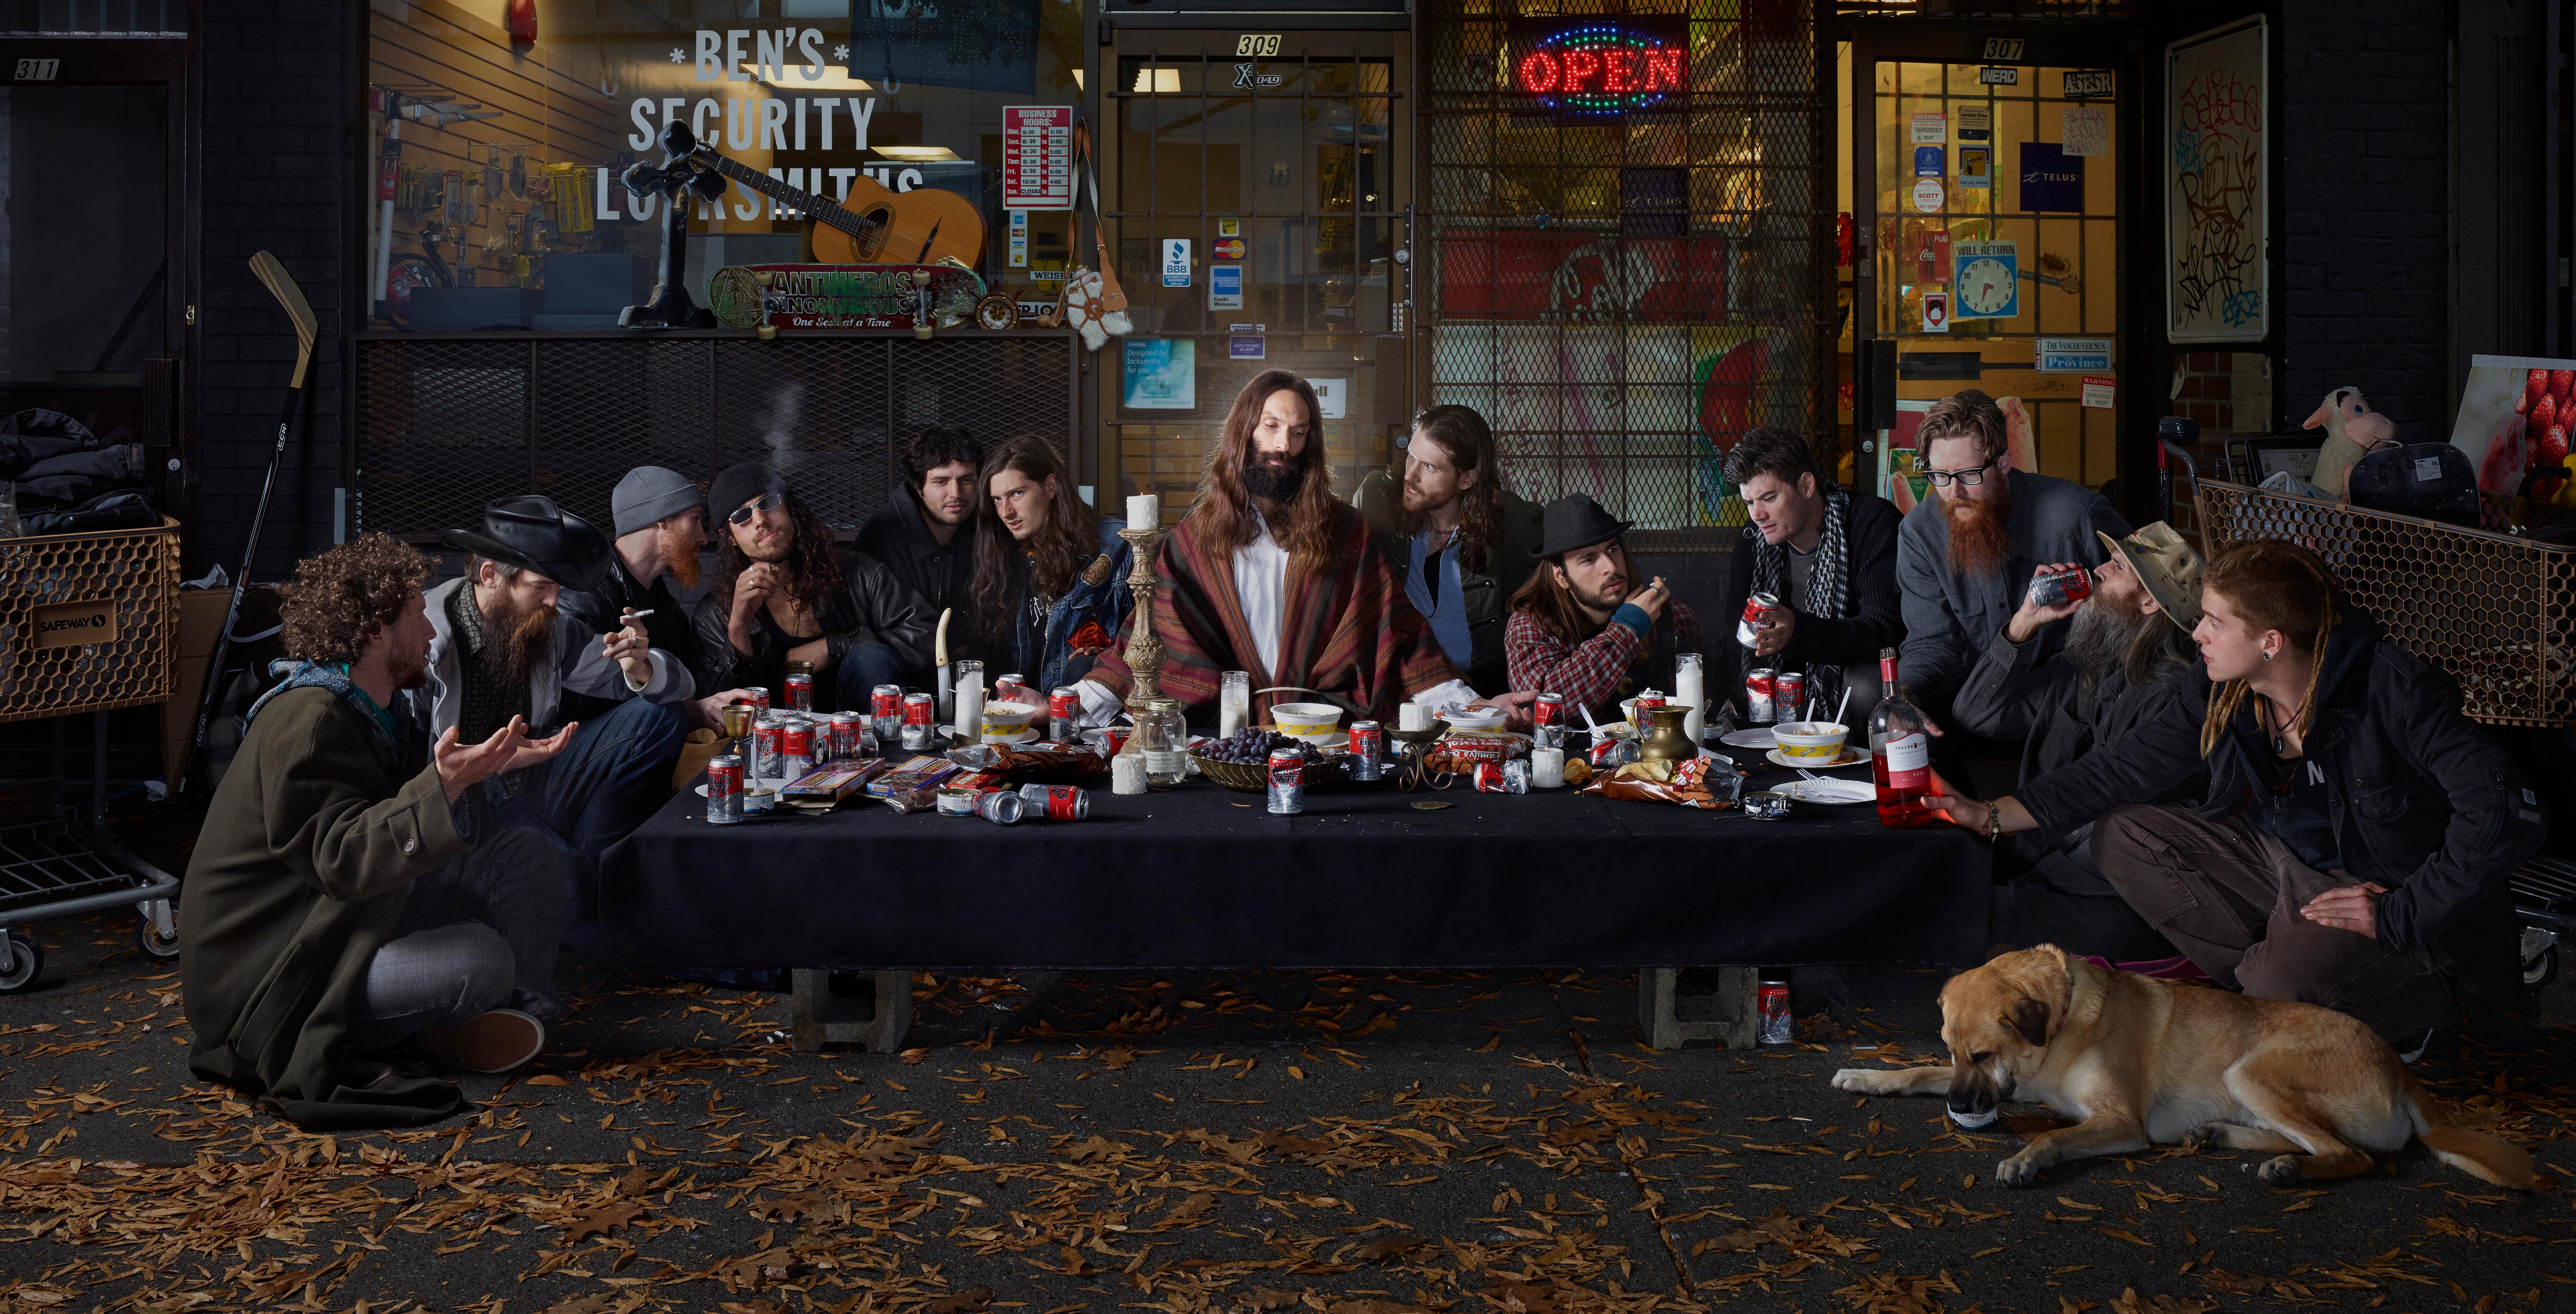 Dina Goldstein Figurative Photograph - Last Supper, East Vancouver